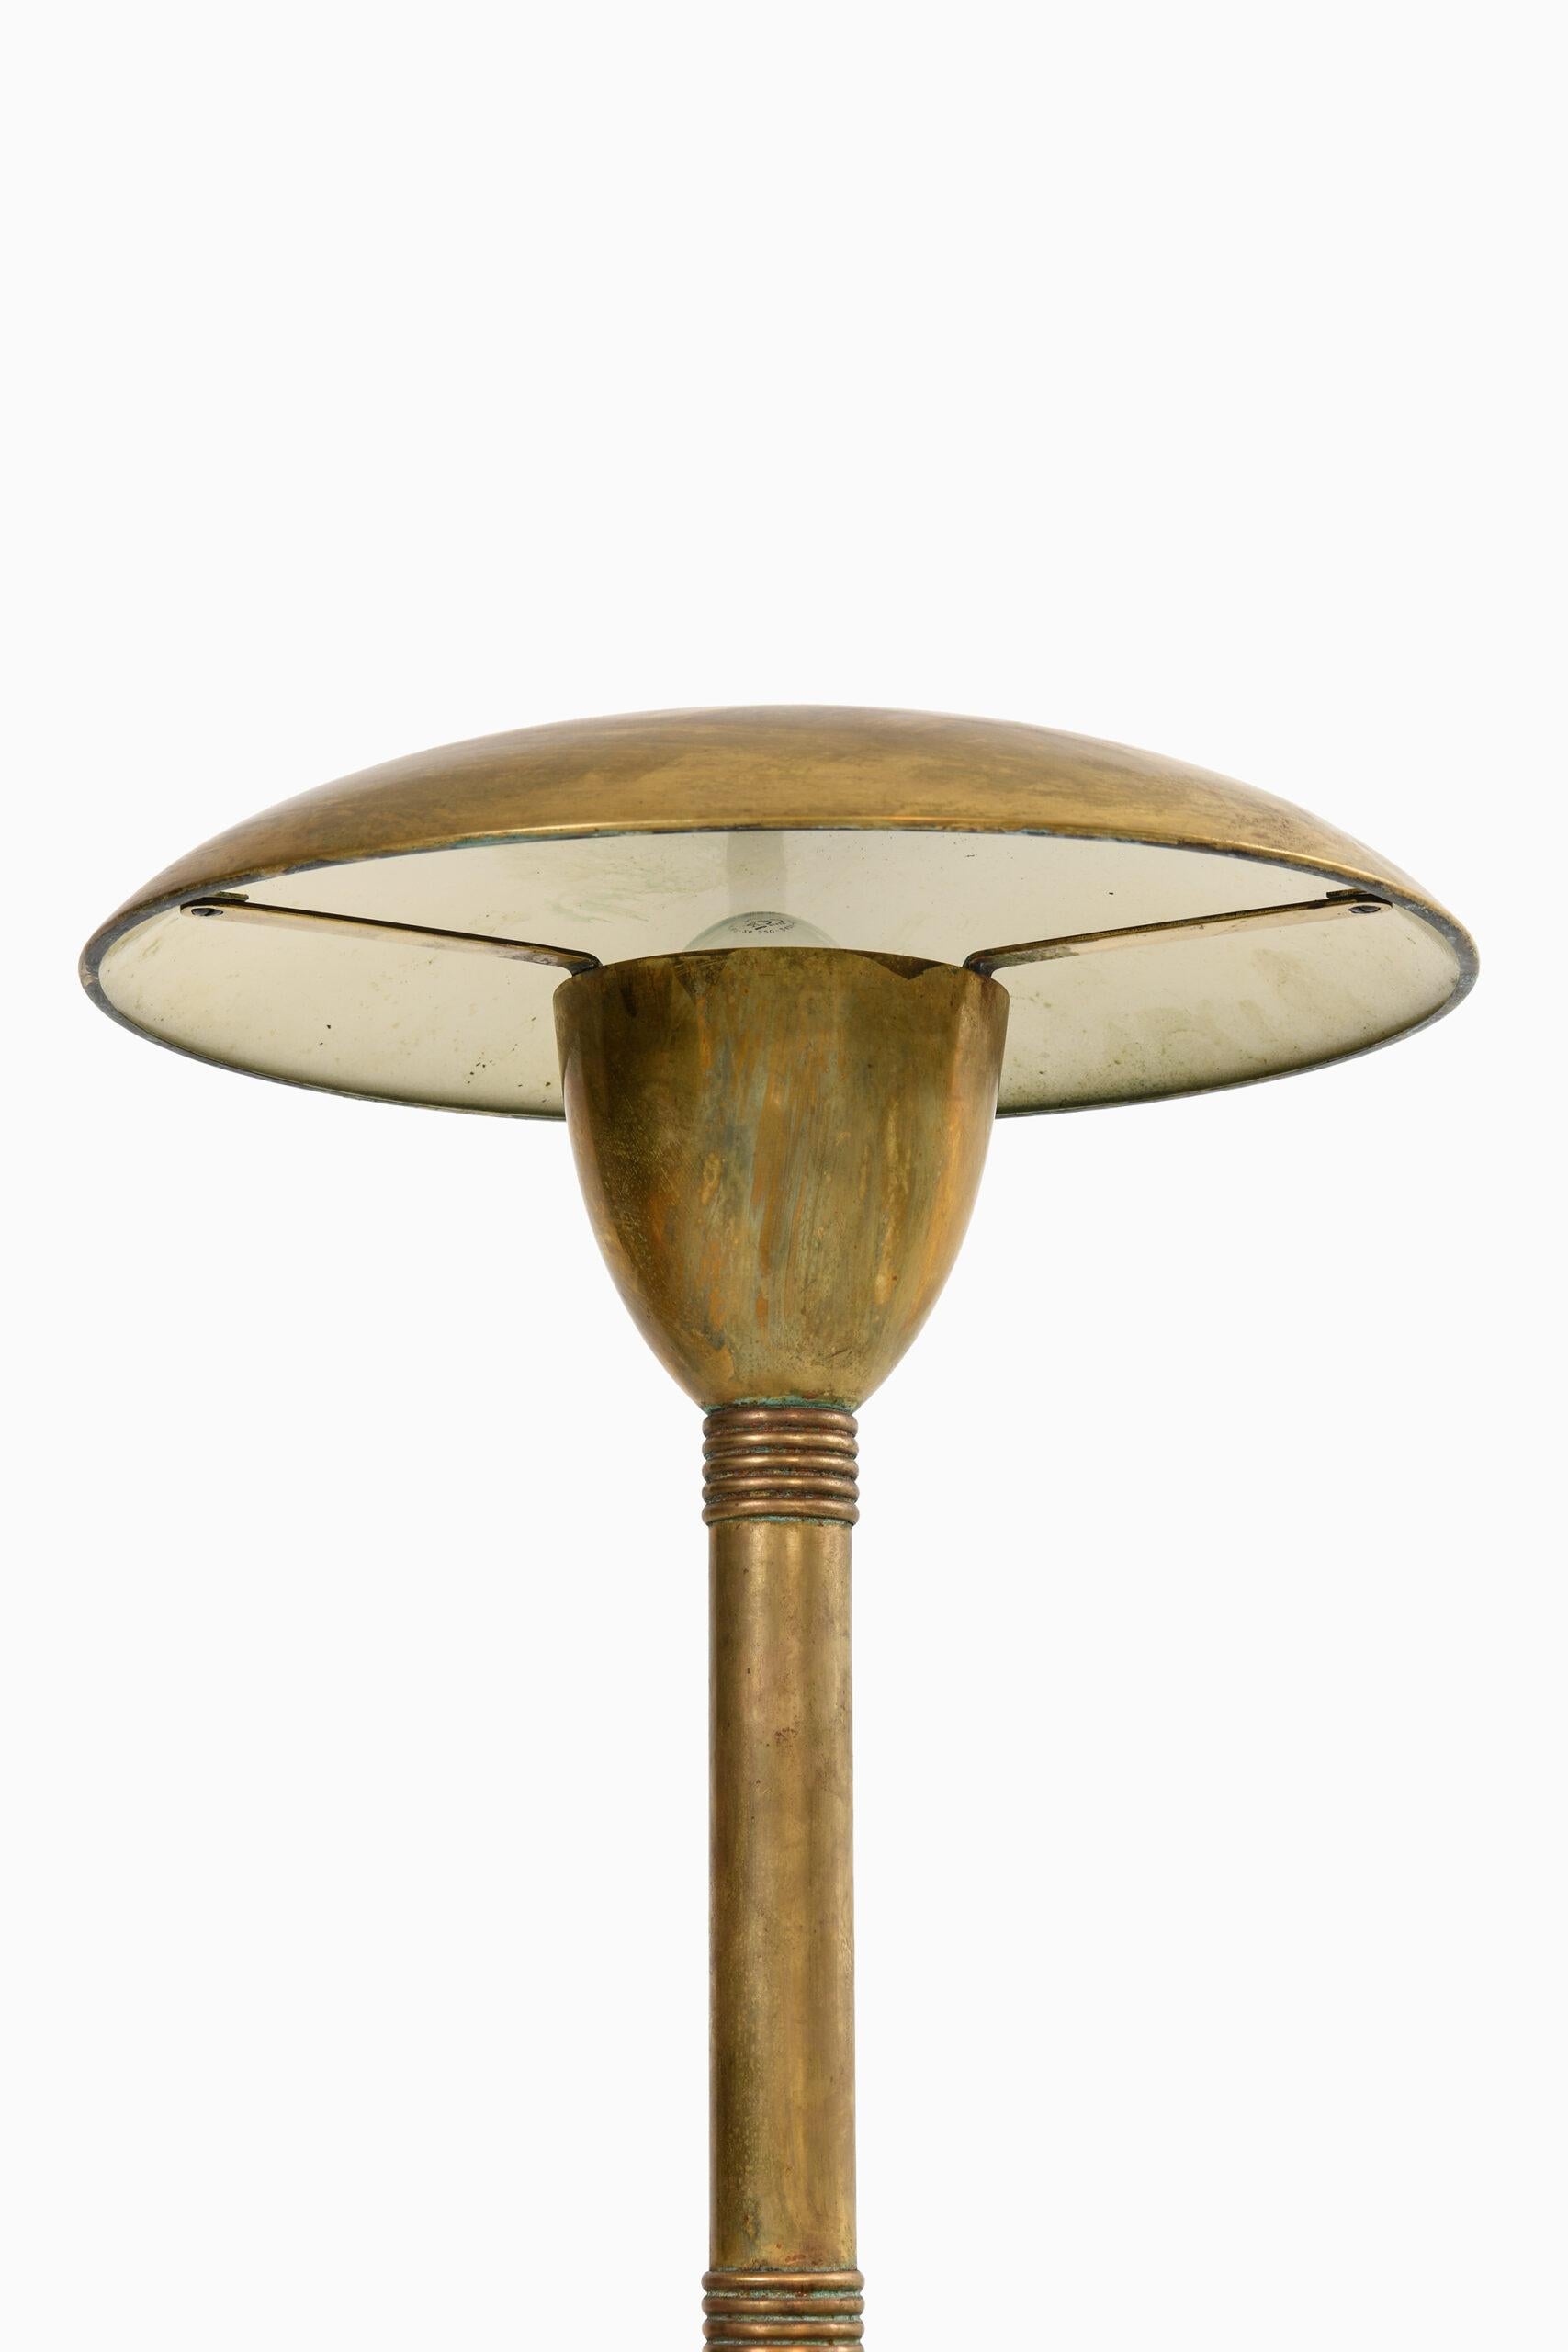 Rare table lamp by unknown designer. Produced in Italy.